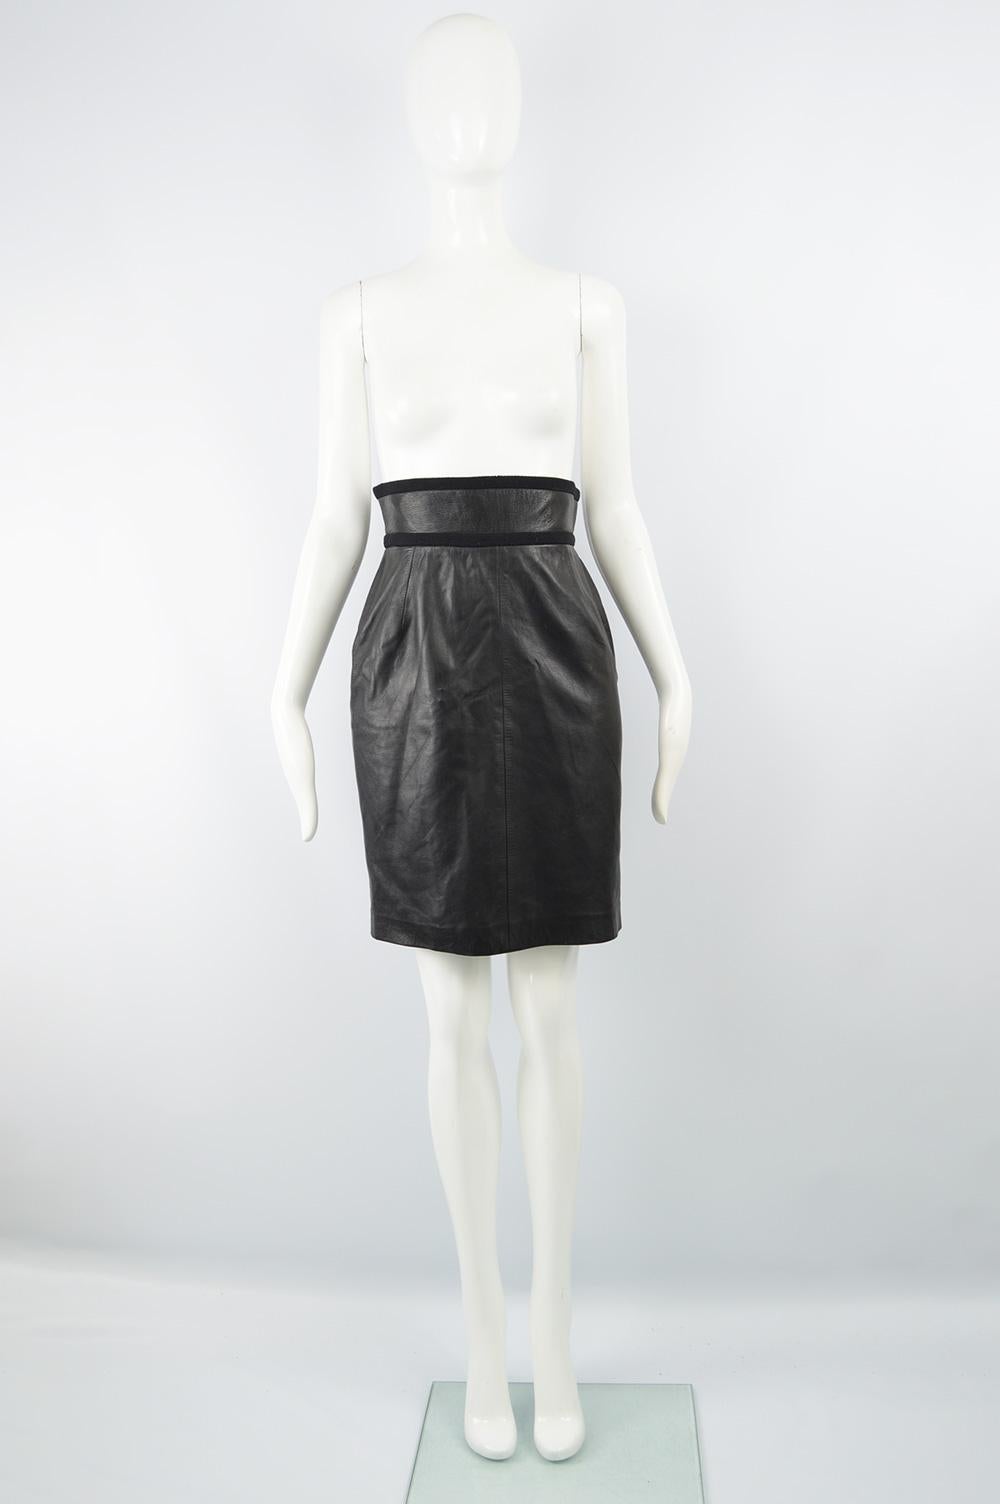 Size: Marked vintage 40 fits more like a modern UK 8/ US 4/ EU 36. Please check measurements. 
Waist - 26” / 66cm
Hips - 36” / 91cm
Length (Waist to Hem) - 22” / 56cm

A fantastic vintage women's fitted, pencil skirt from the 80s by luxury Spanish